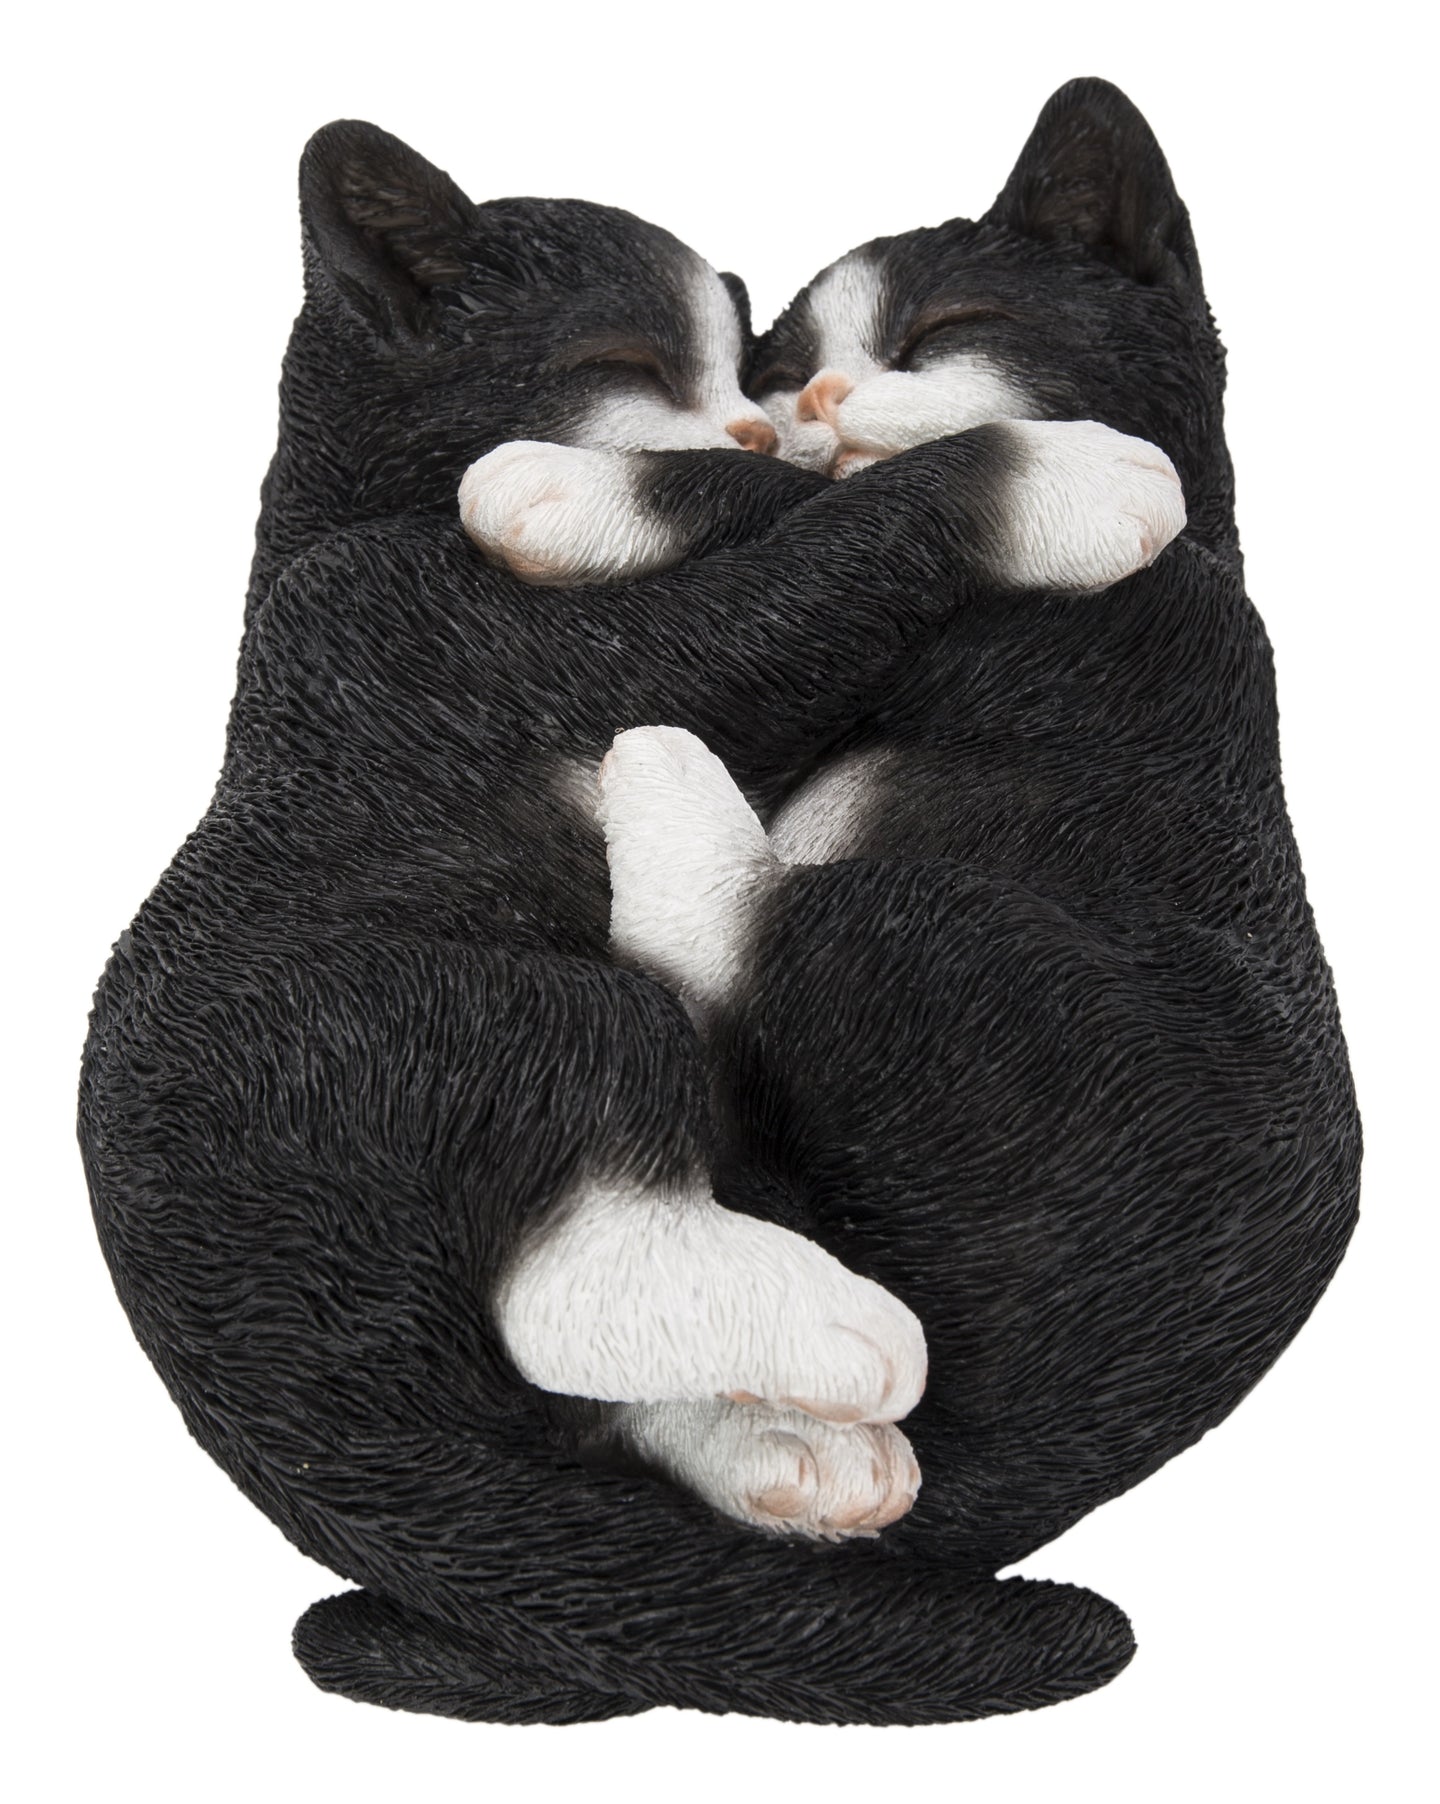 87757-S - Sleeping Couple Cats - Black And White